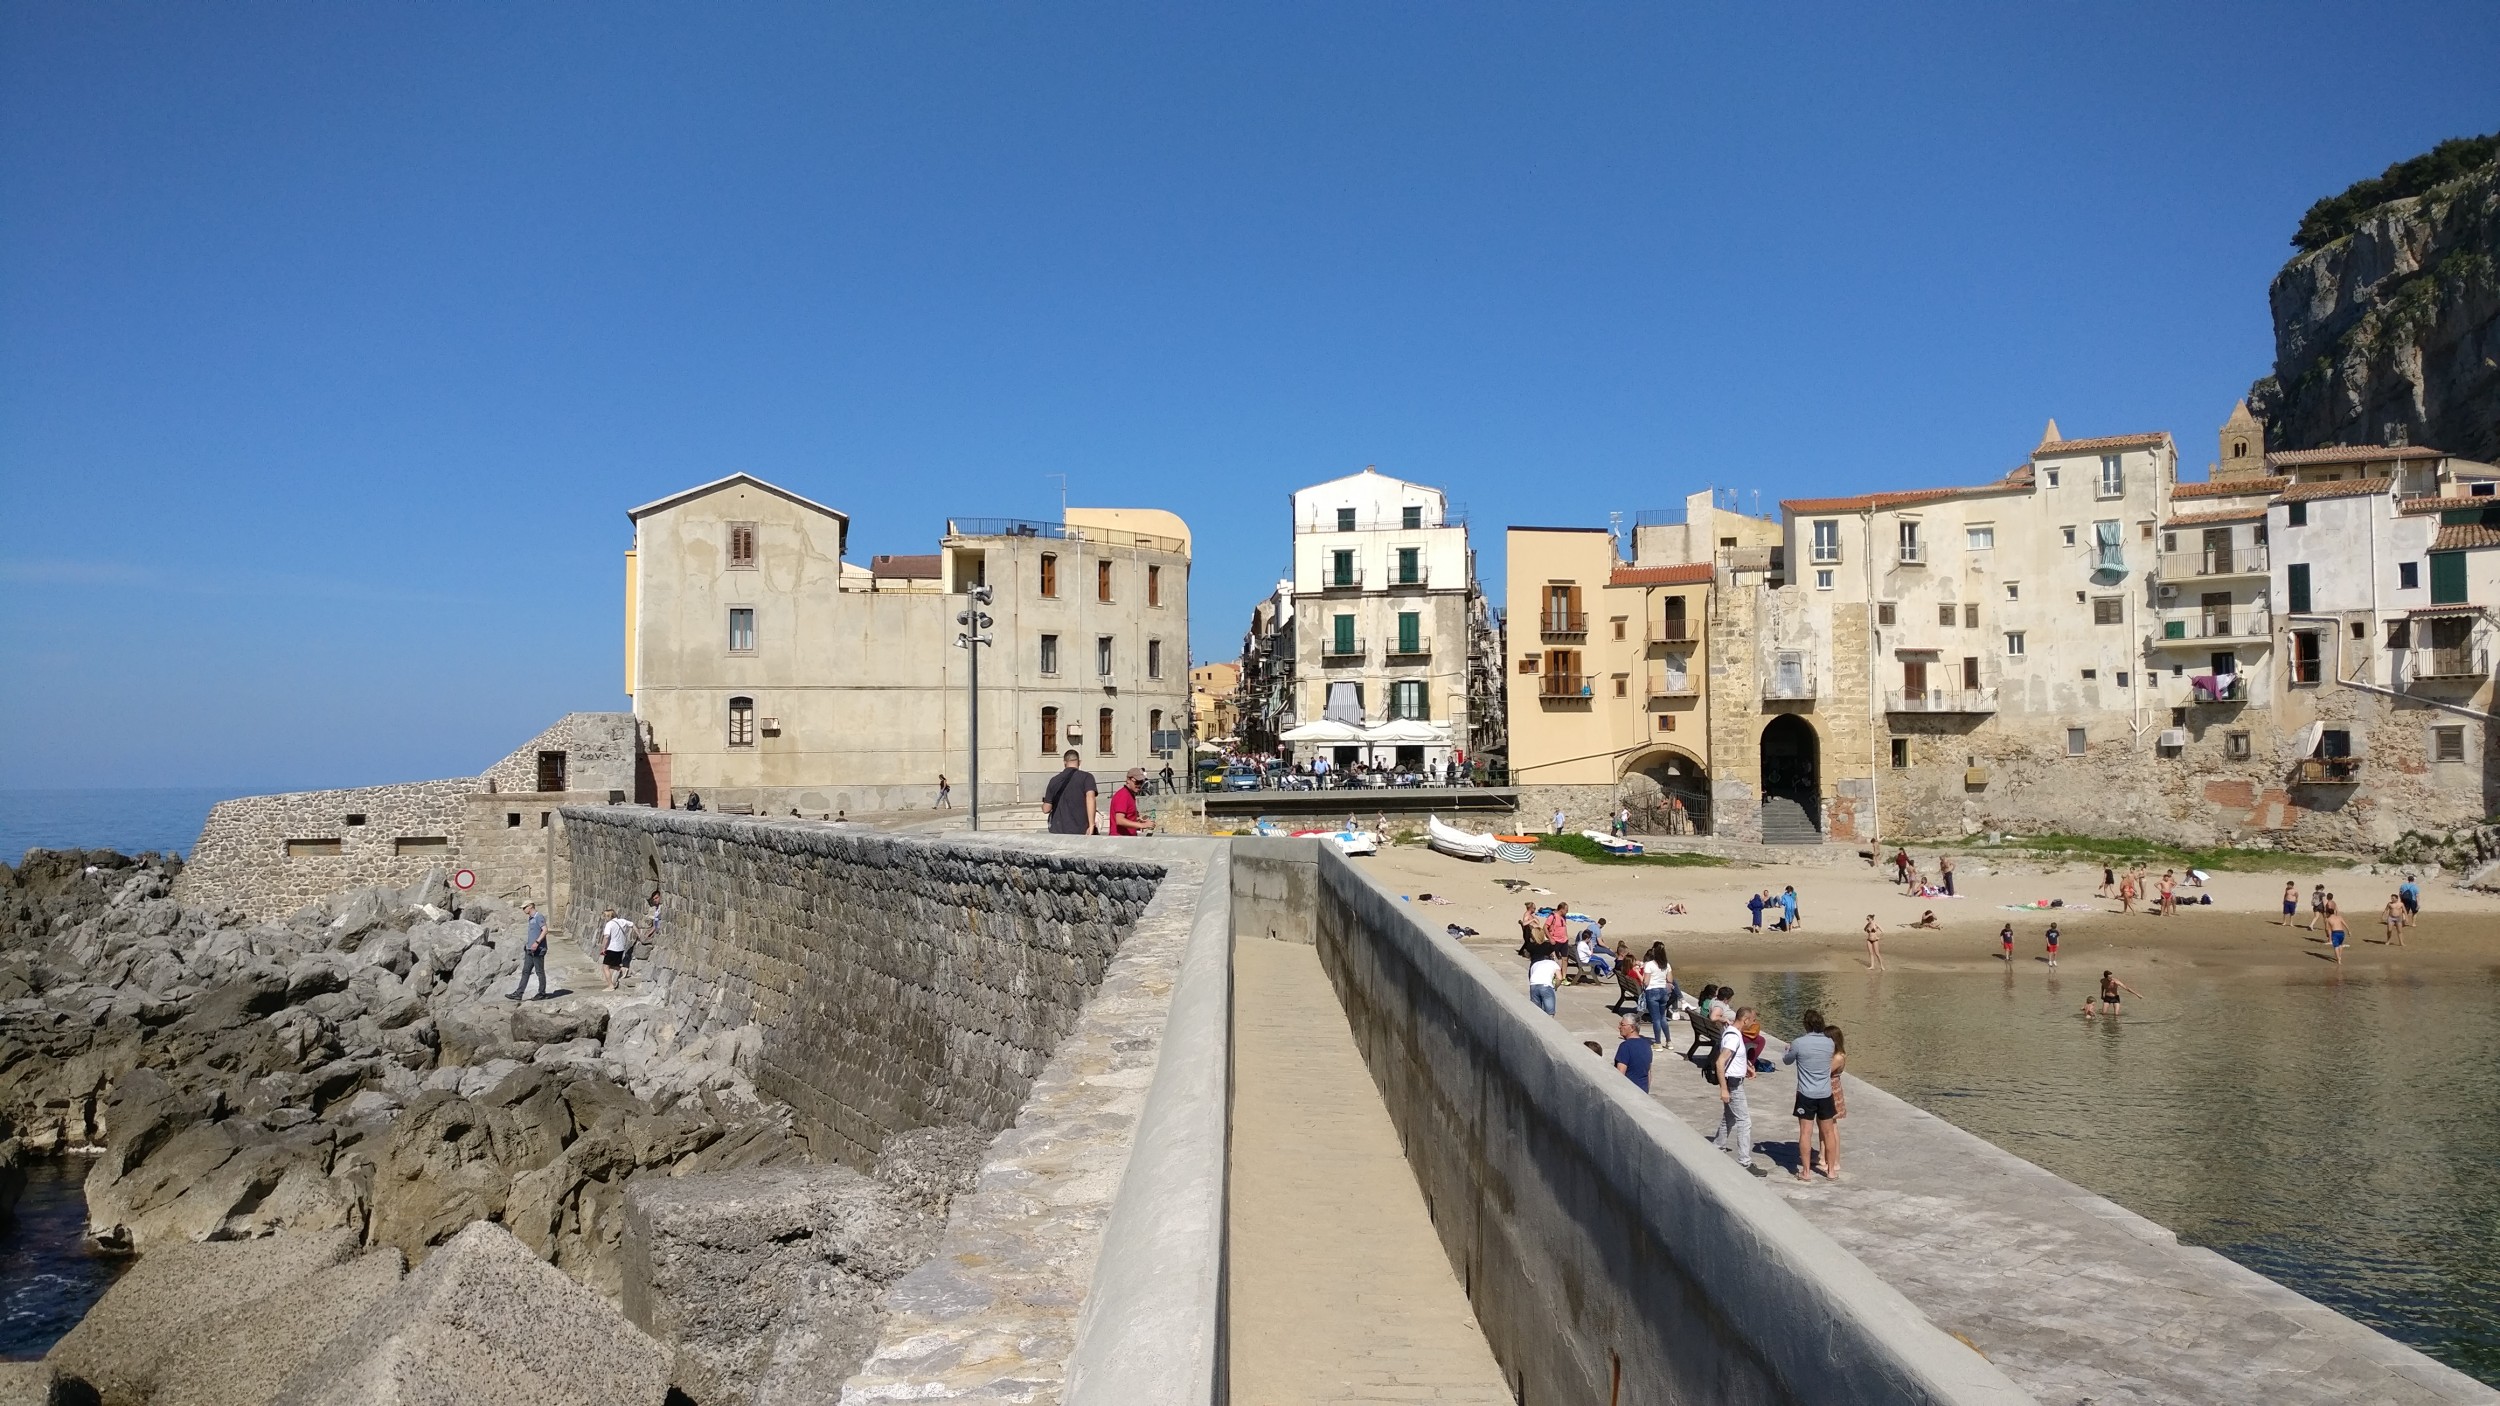 Beaches and Old Town : Cefalu Sicily  Visions of Travel